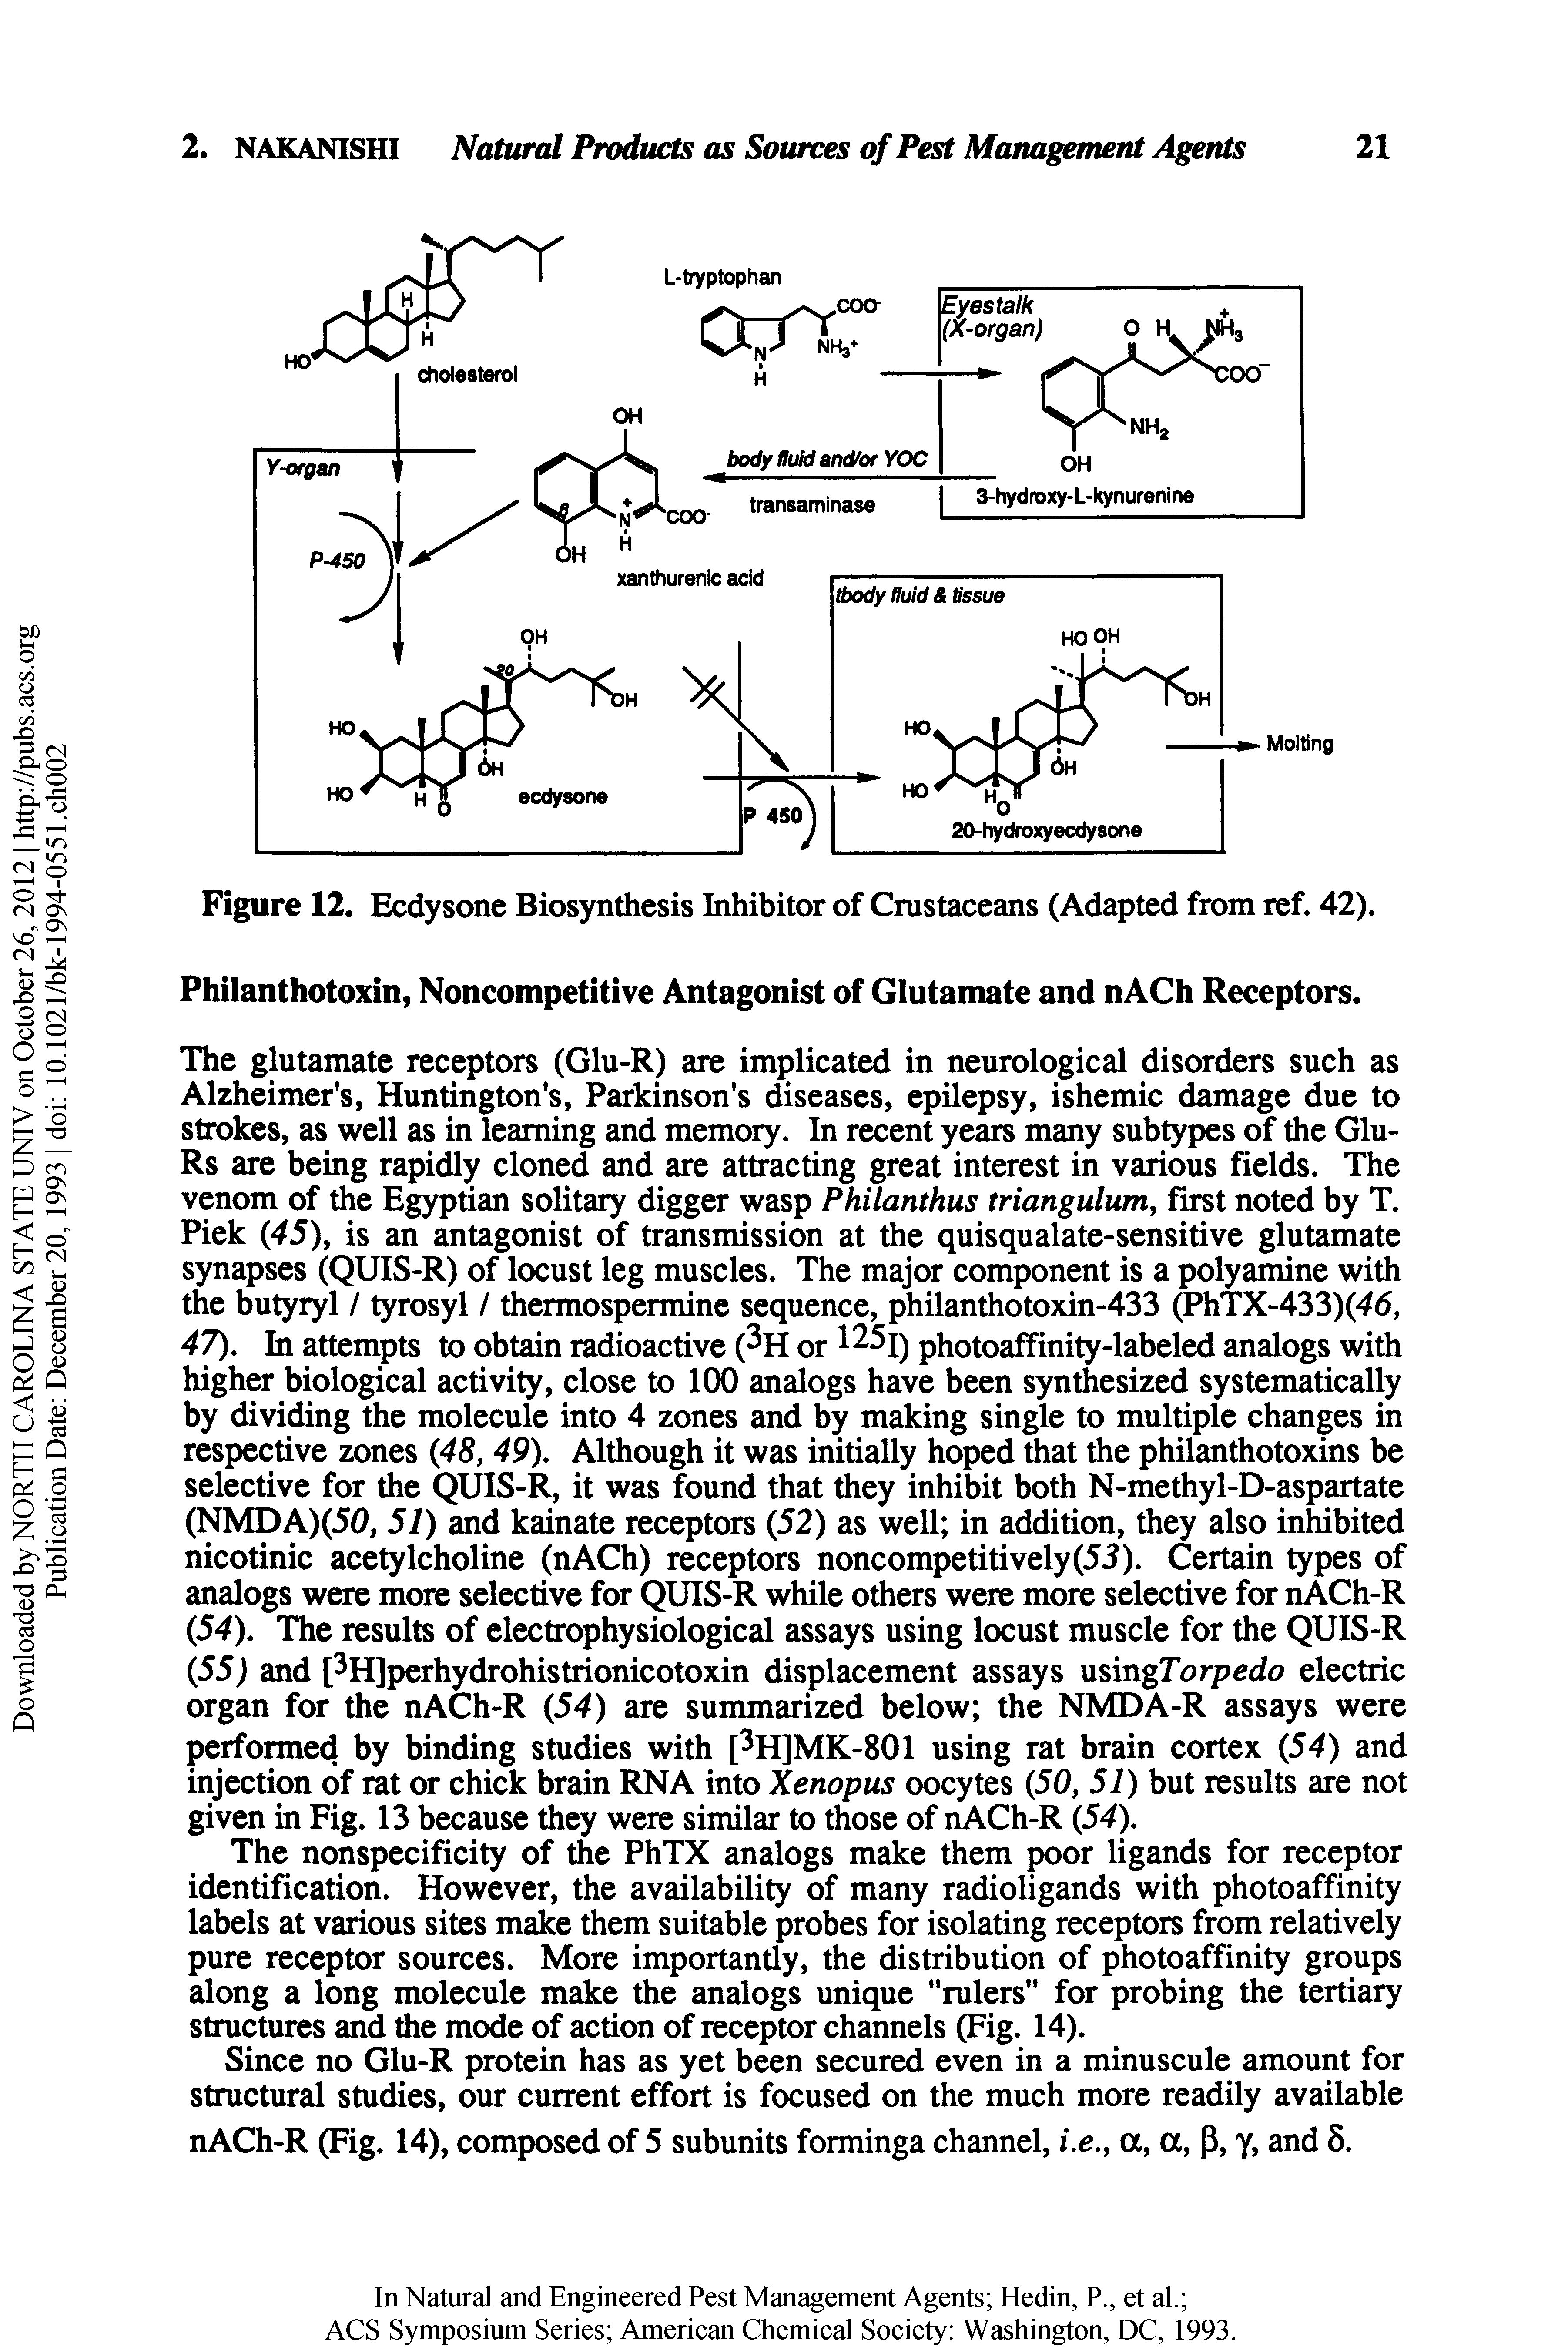 Figure 12. Ecdysone Biosynthesis Inhibitor of Crustaceans (Adapted from ref. 42).